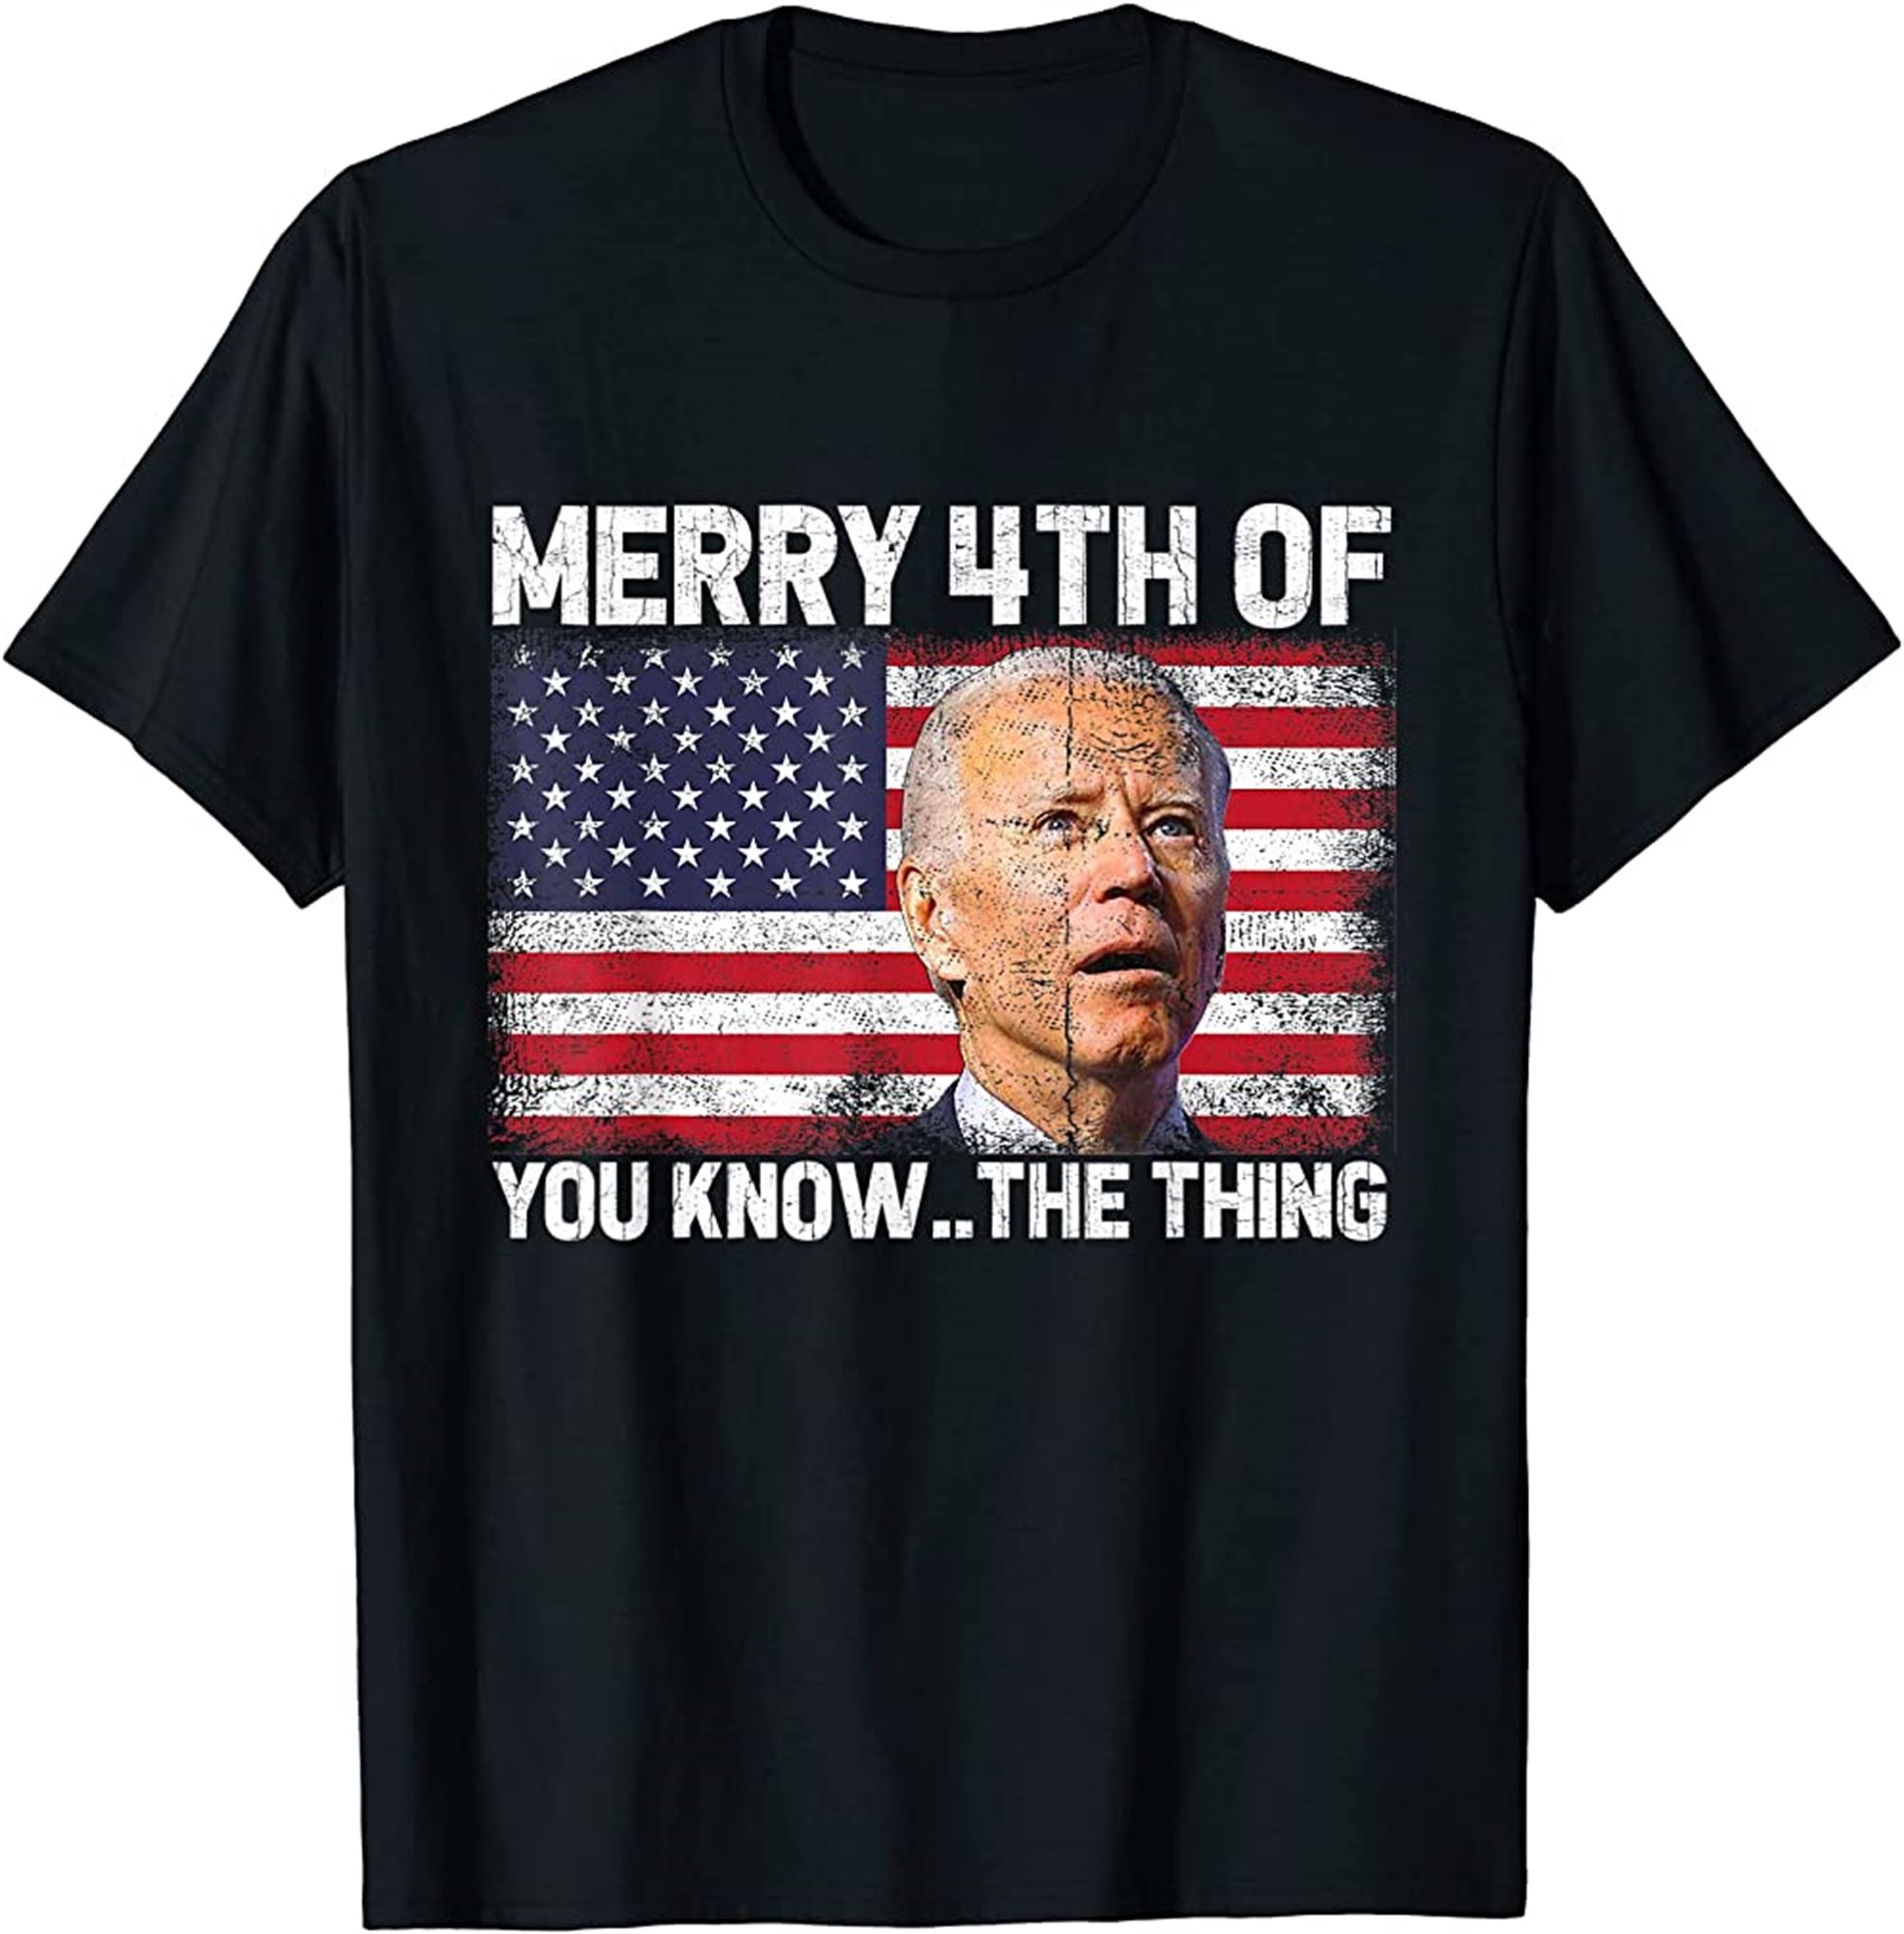 Merry 4th Of You Knowthe Thing Biden Meme 4th Of July T-shirt Size Up To 5xl